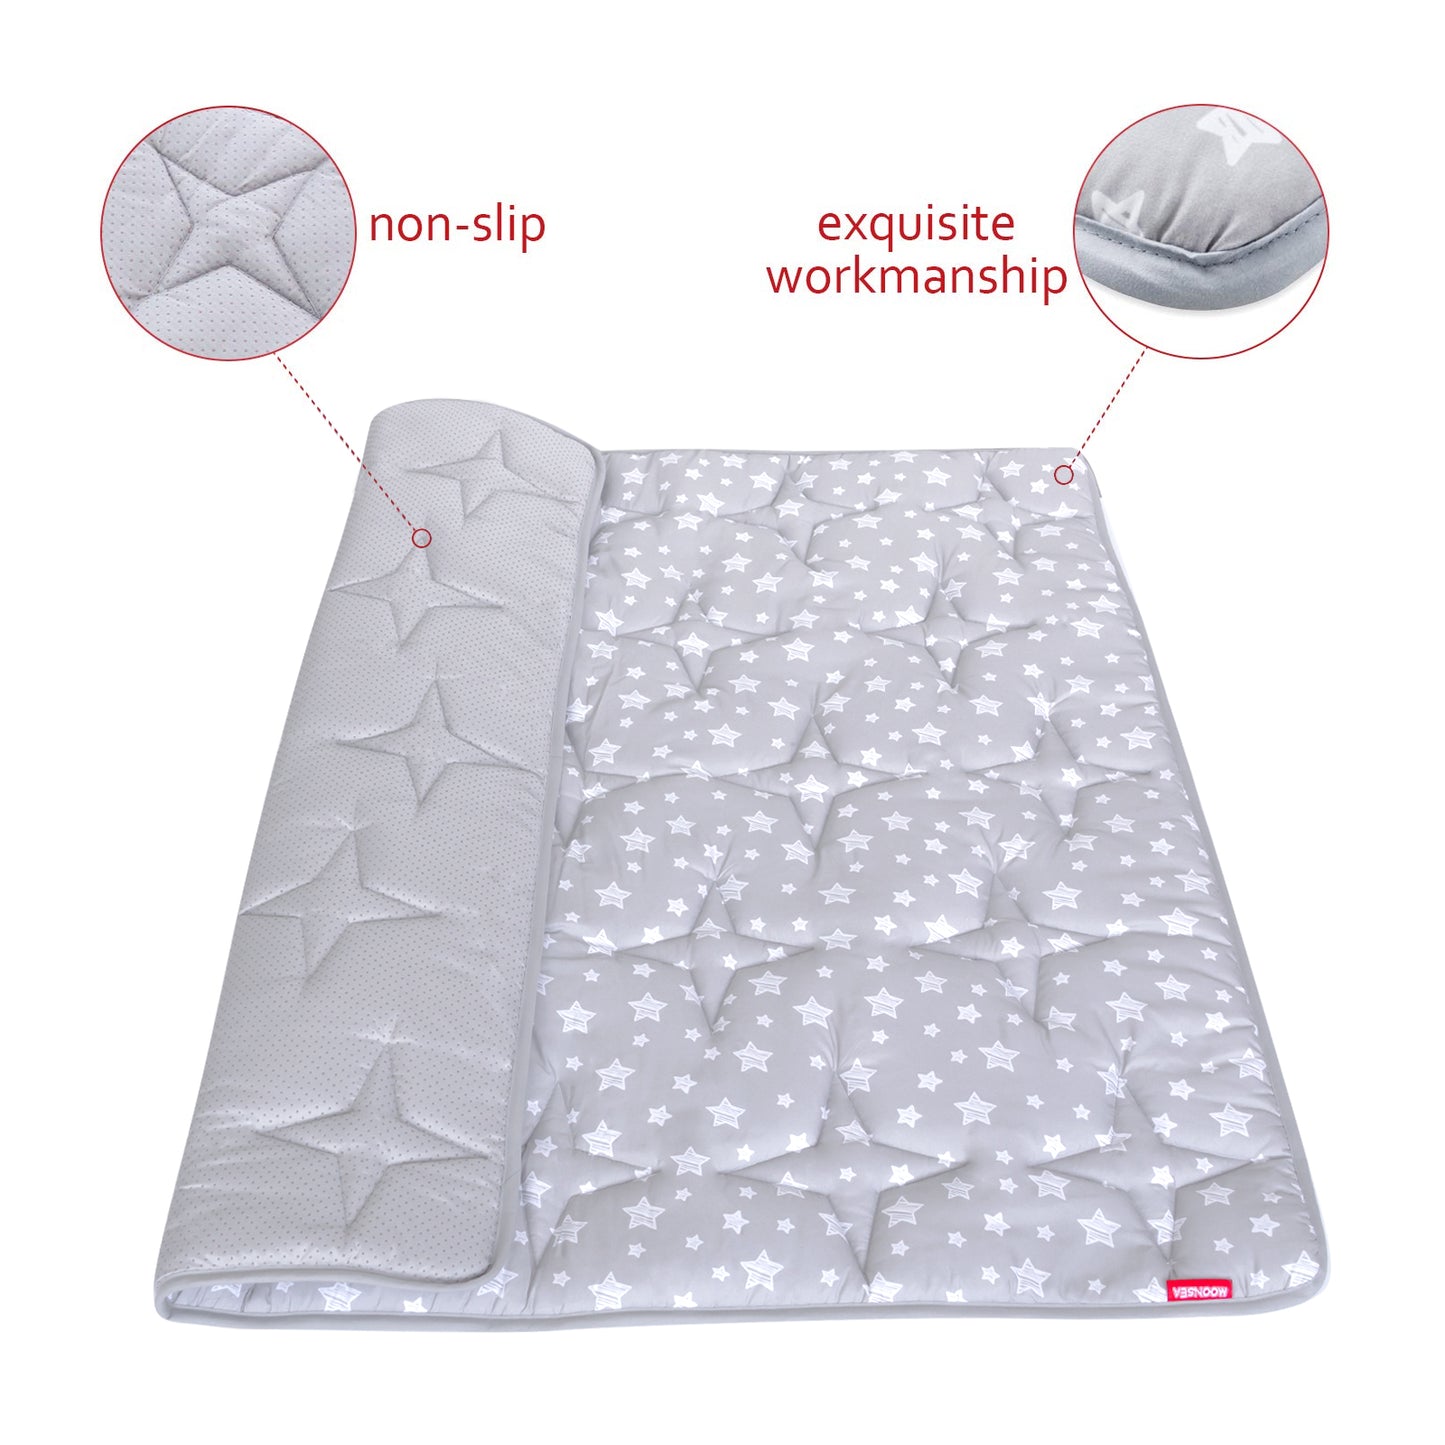 Baby Play Mat | Playpen Mat - Square 47" x 47", Large Padded Tummy Time Activity Mat for Infant & Toddler, Grey Star